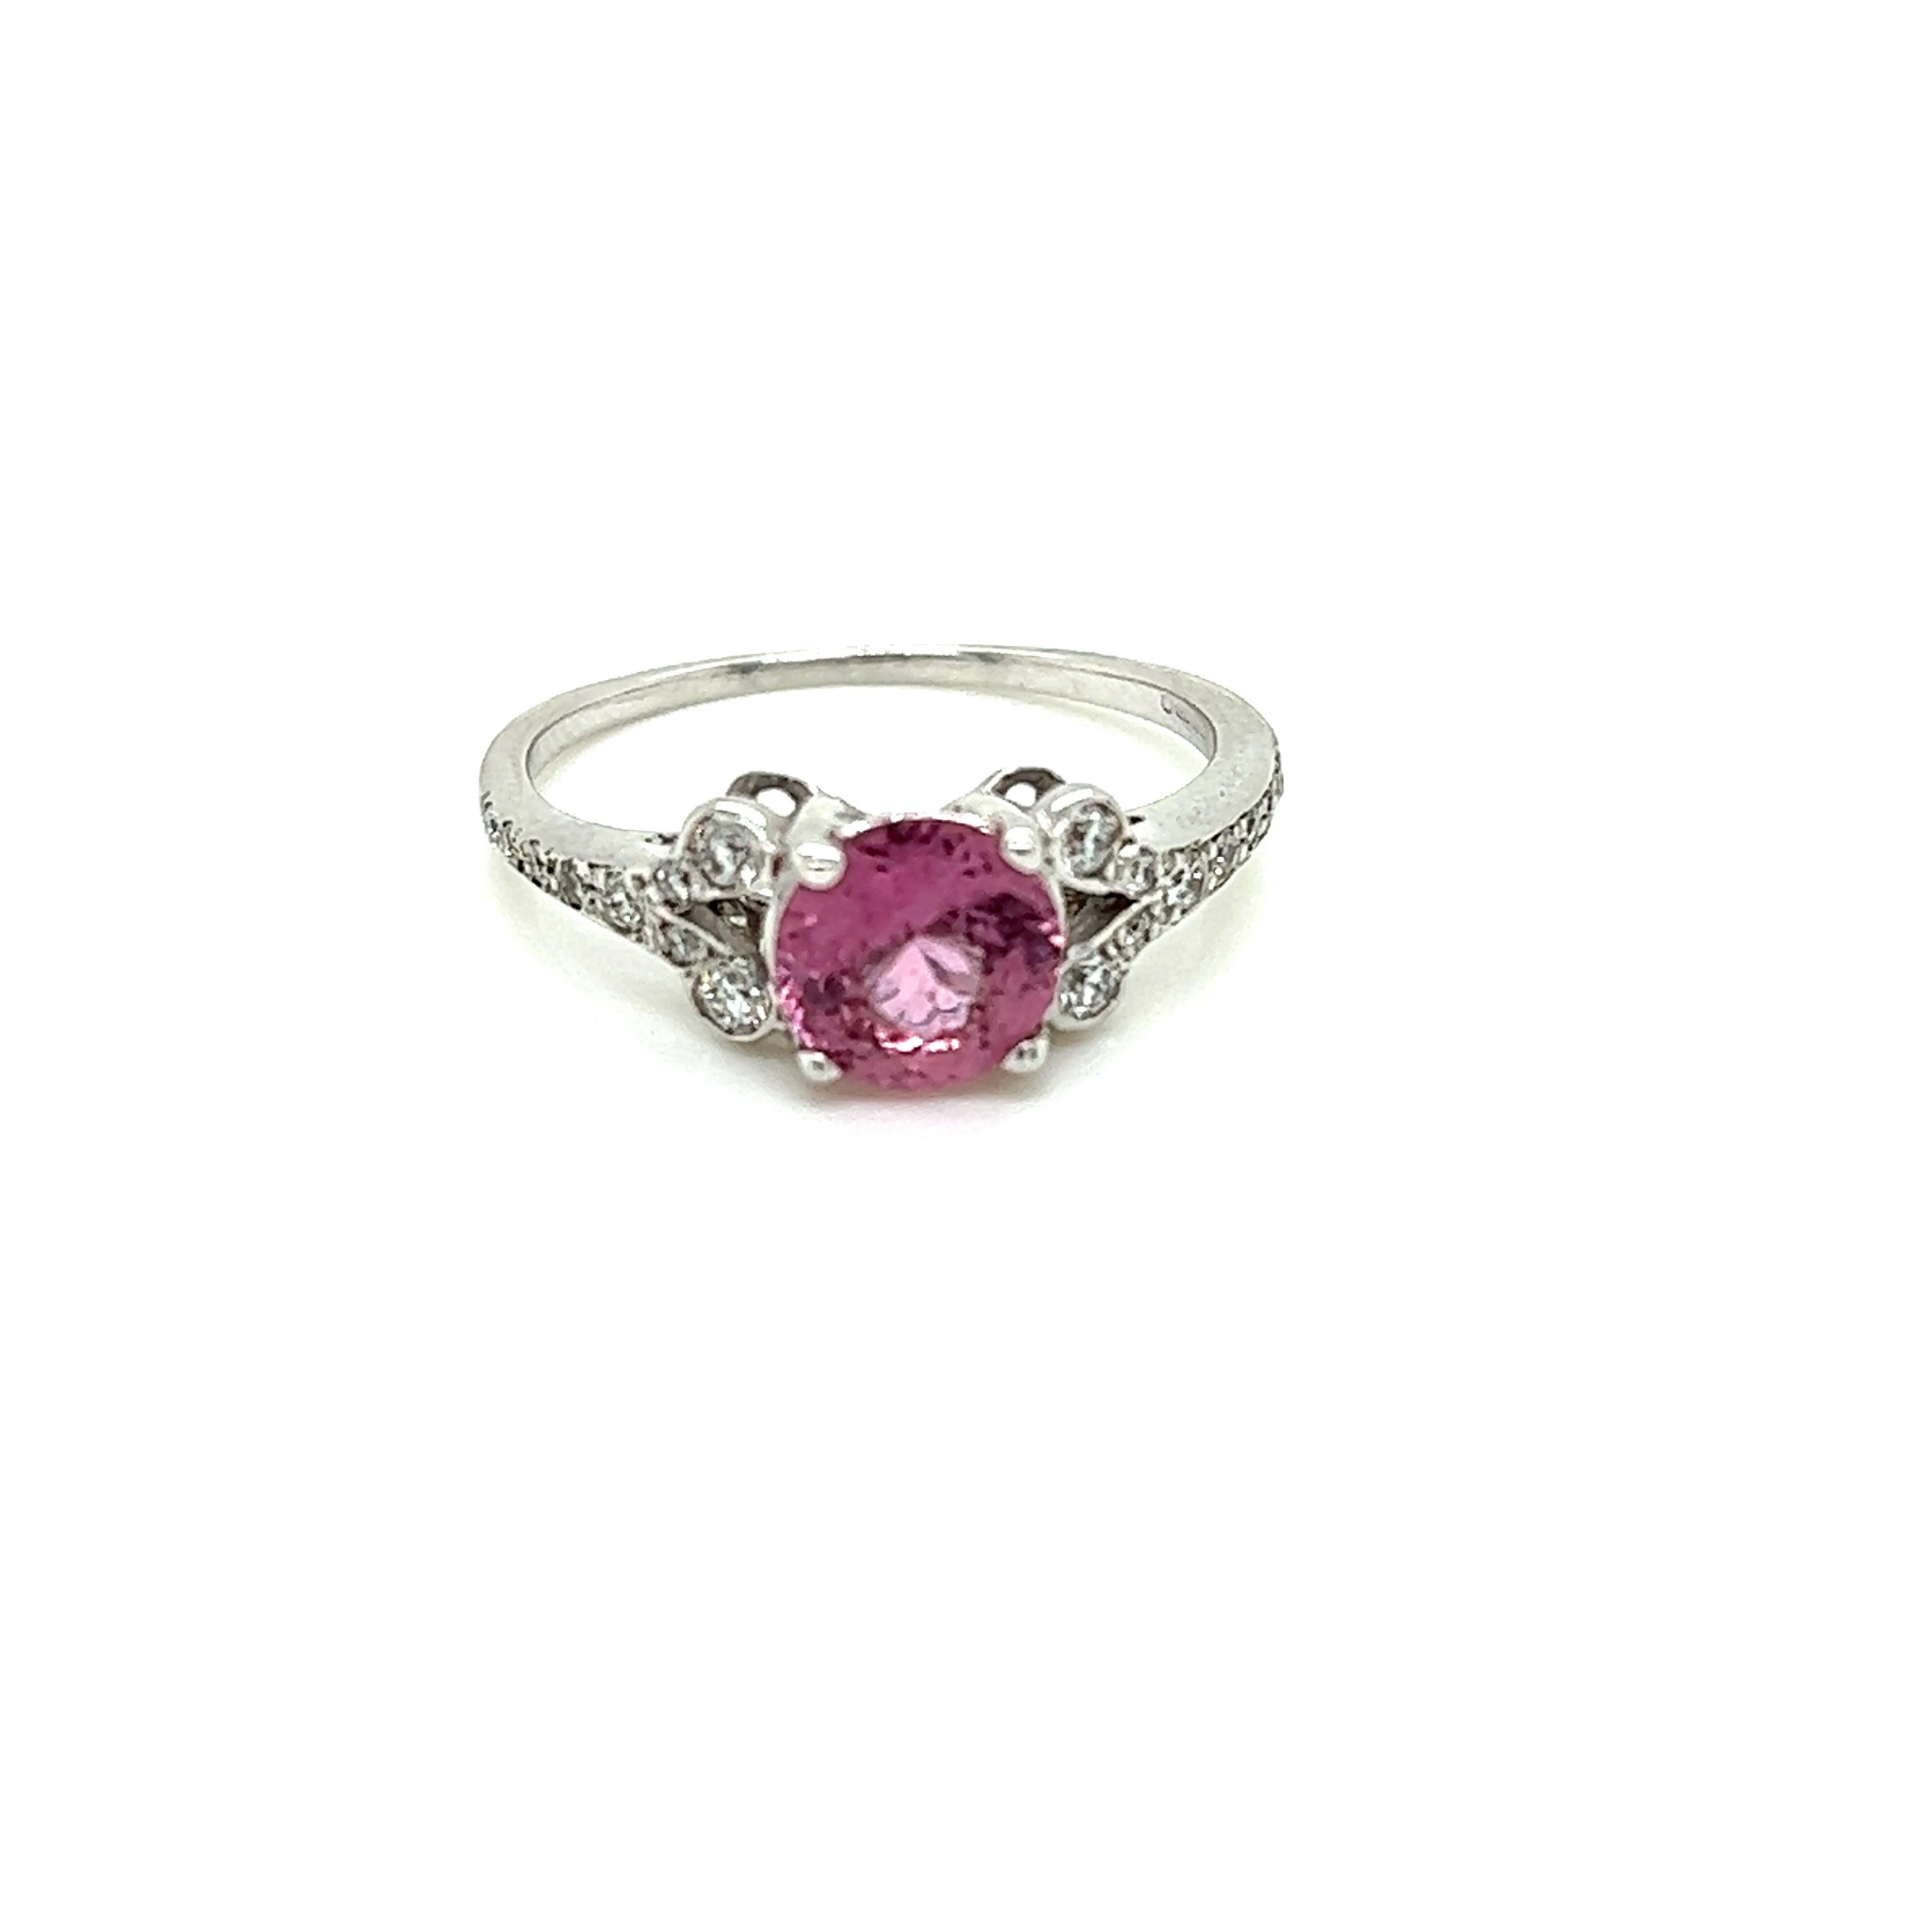 1.29 Carat Round Pink Sapphire and Diamond Ring in 18 Karat White Gold

This graceful ring features a stunning round brilliant Pink Sapphire at its centre. Embedded on the intricate 18K White Gold band it is held on are scintillating round brilliant